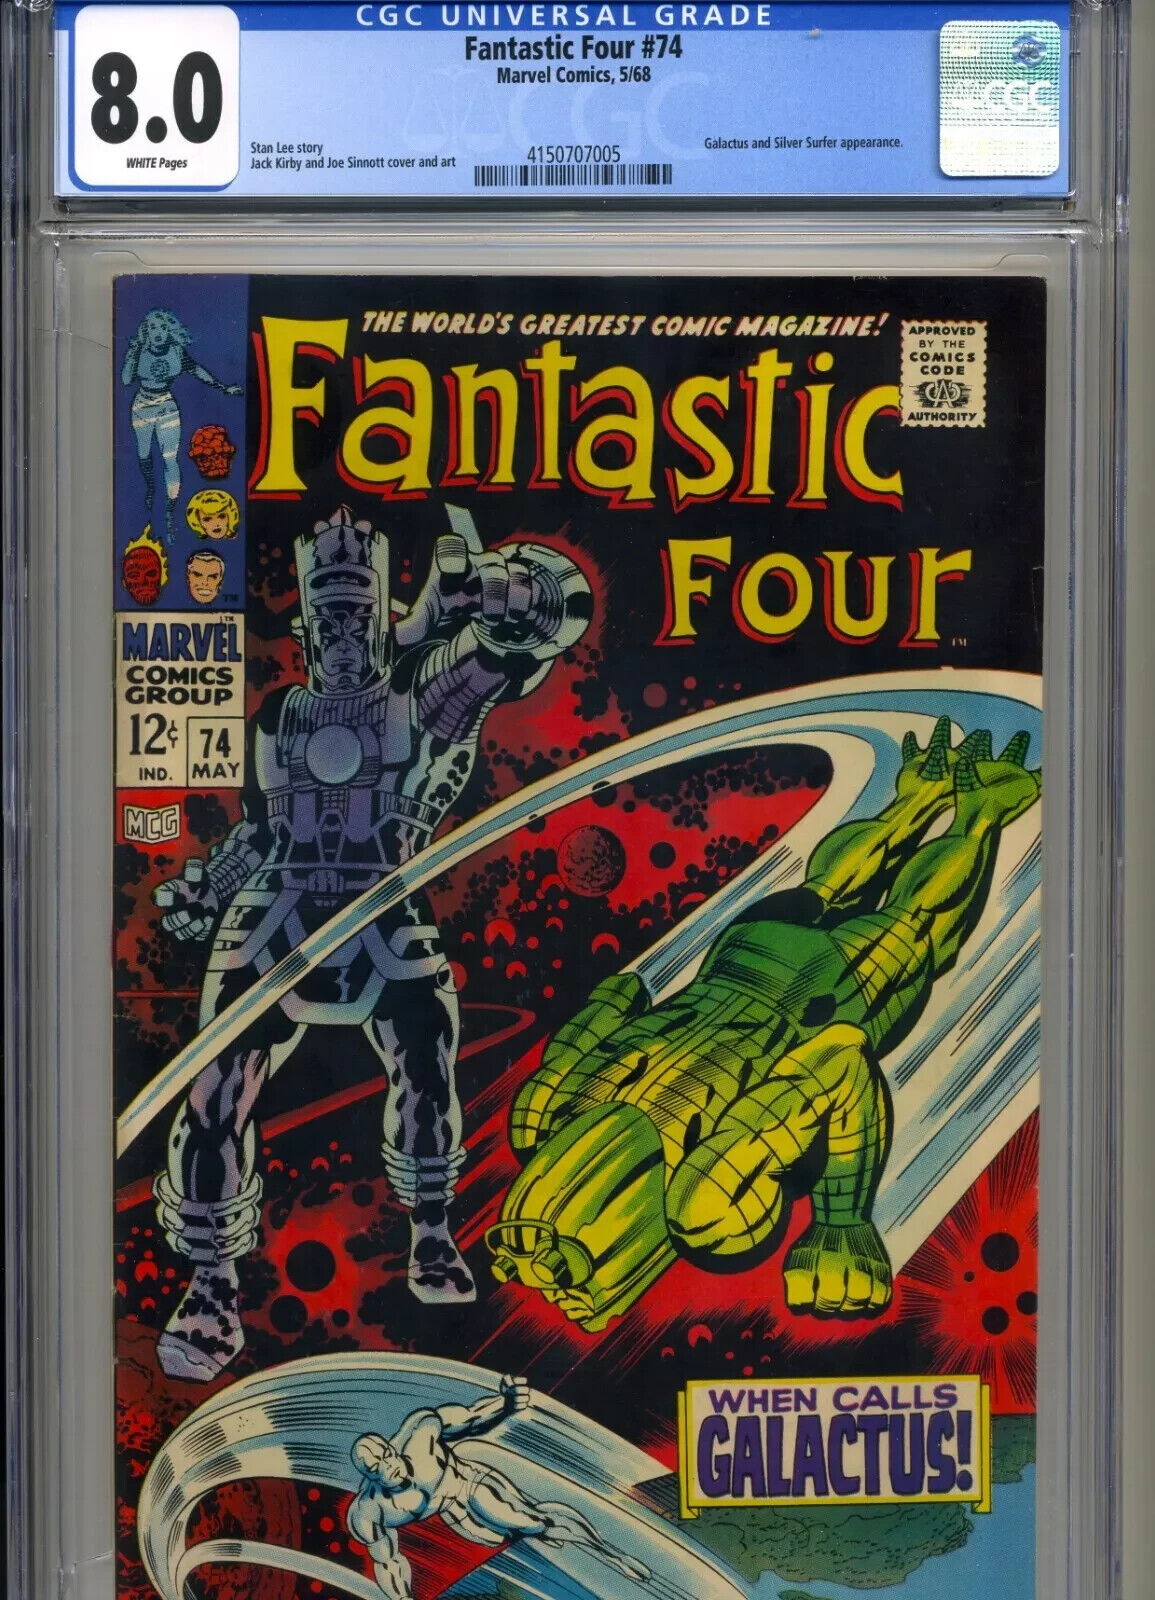 FANTASTIC FOUR #74 CGC 8.0 WHITE PAGES SIVER SURFER/GALACTUS